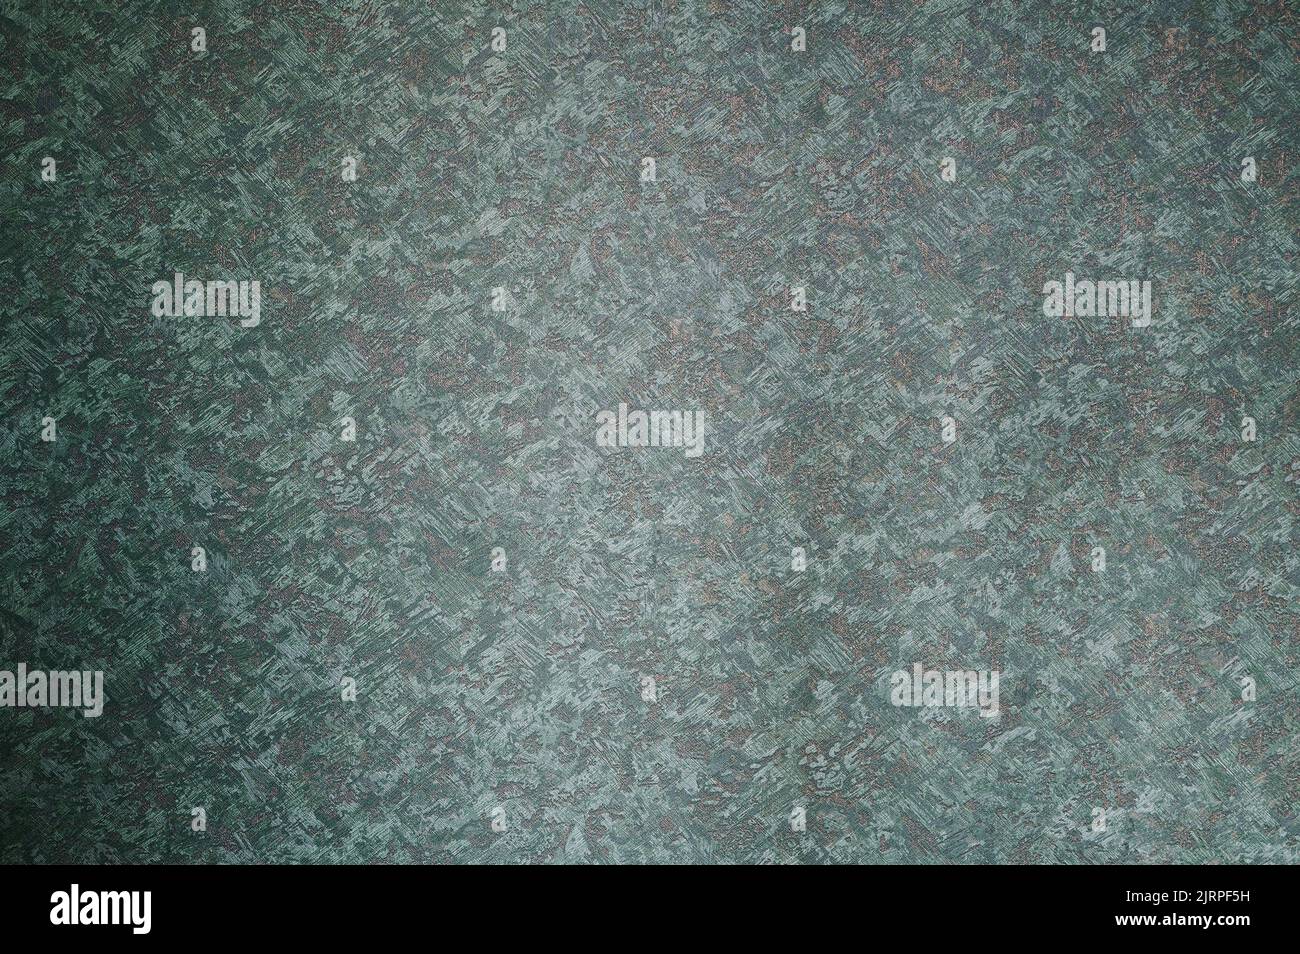 Abstract dark green velvet background close up view Stock Photo